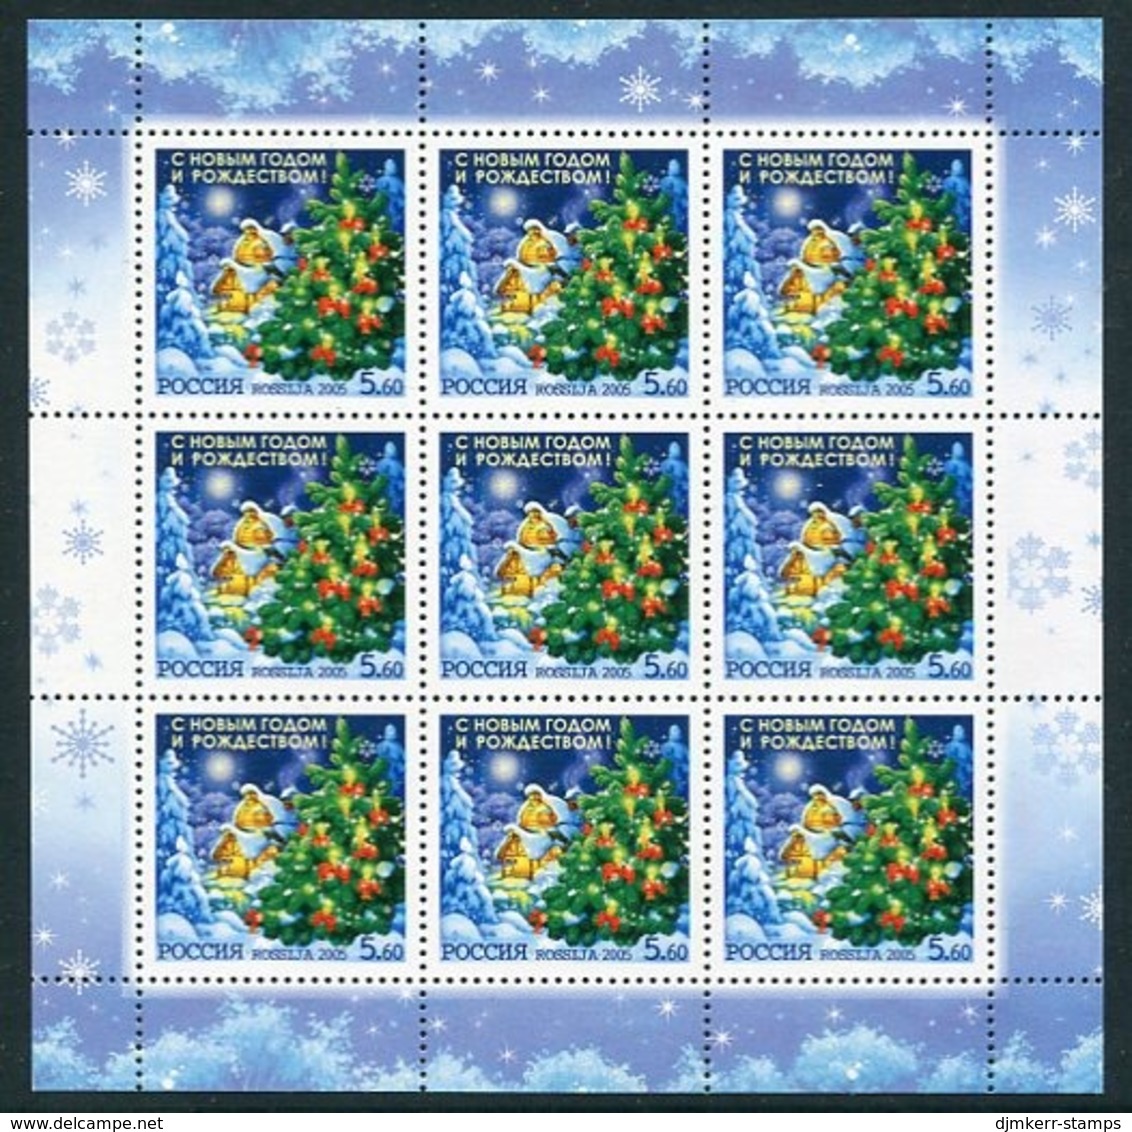 RUSSIA 2005 Christmas And New Year Sheetlet  MNH / **.  Michel 1294 - Blocs & Hojas